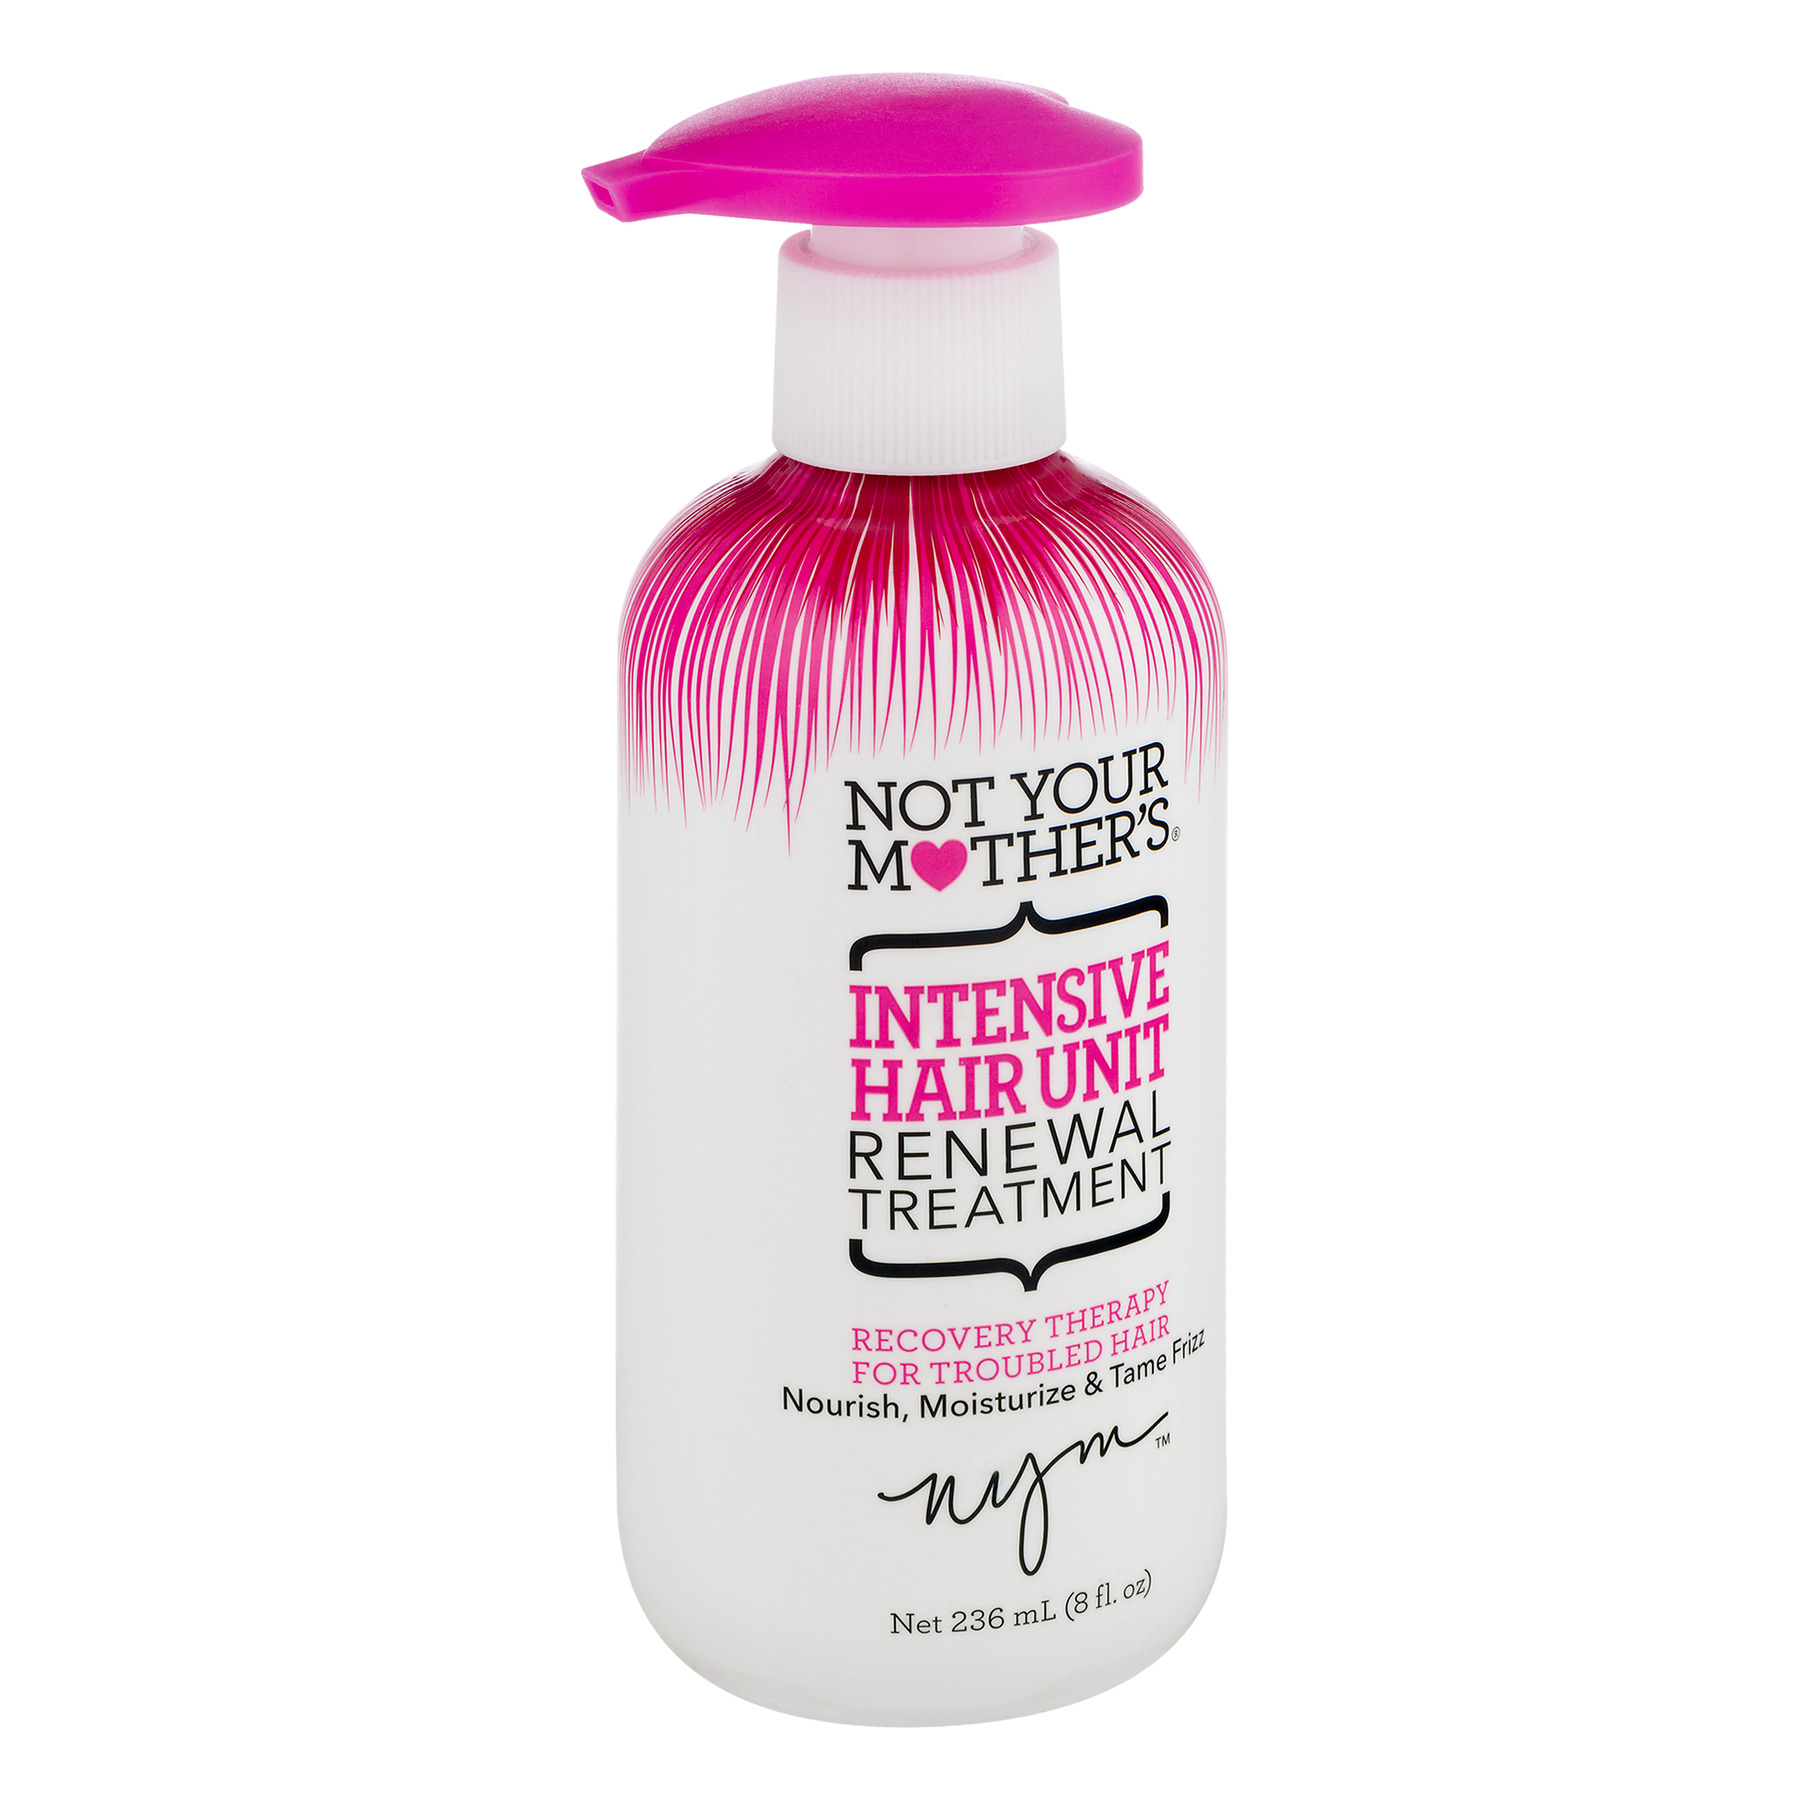 Not Your Mother's Intensive Hair Unit Renewal Treatment, 8 oz - image 2 of 5